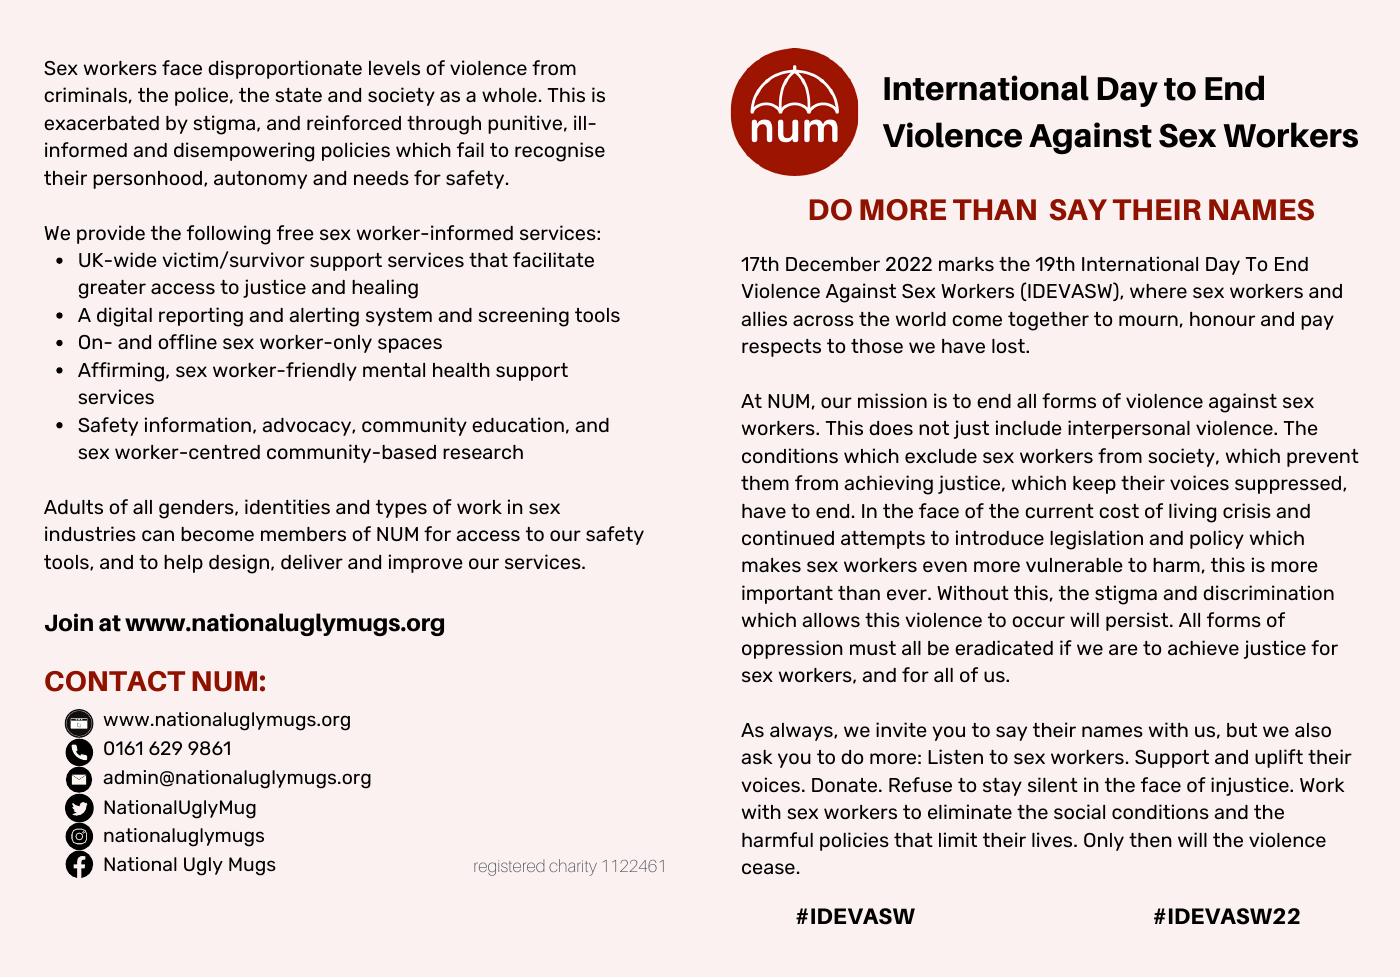 International Day To End Violence Against Sex Workers 2022